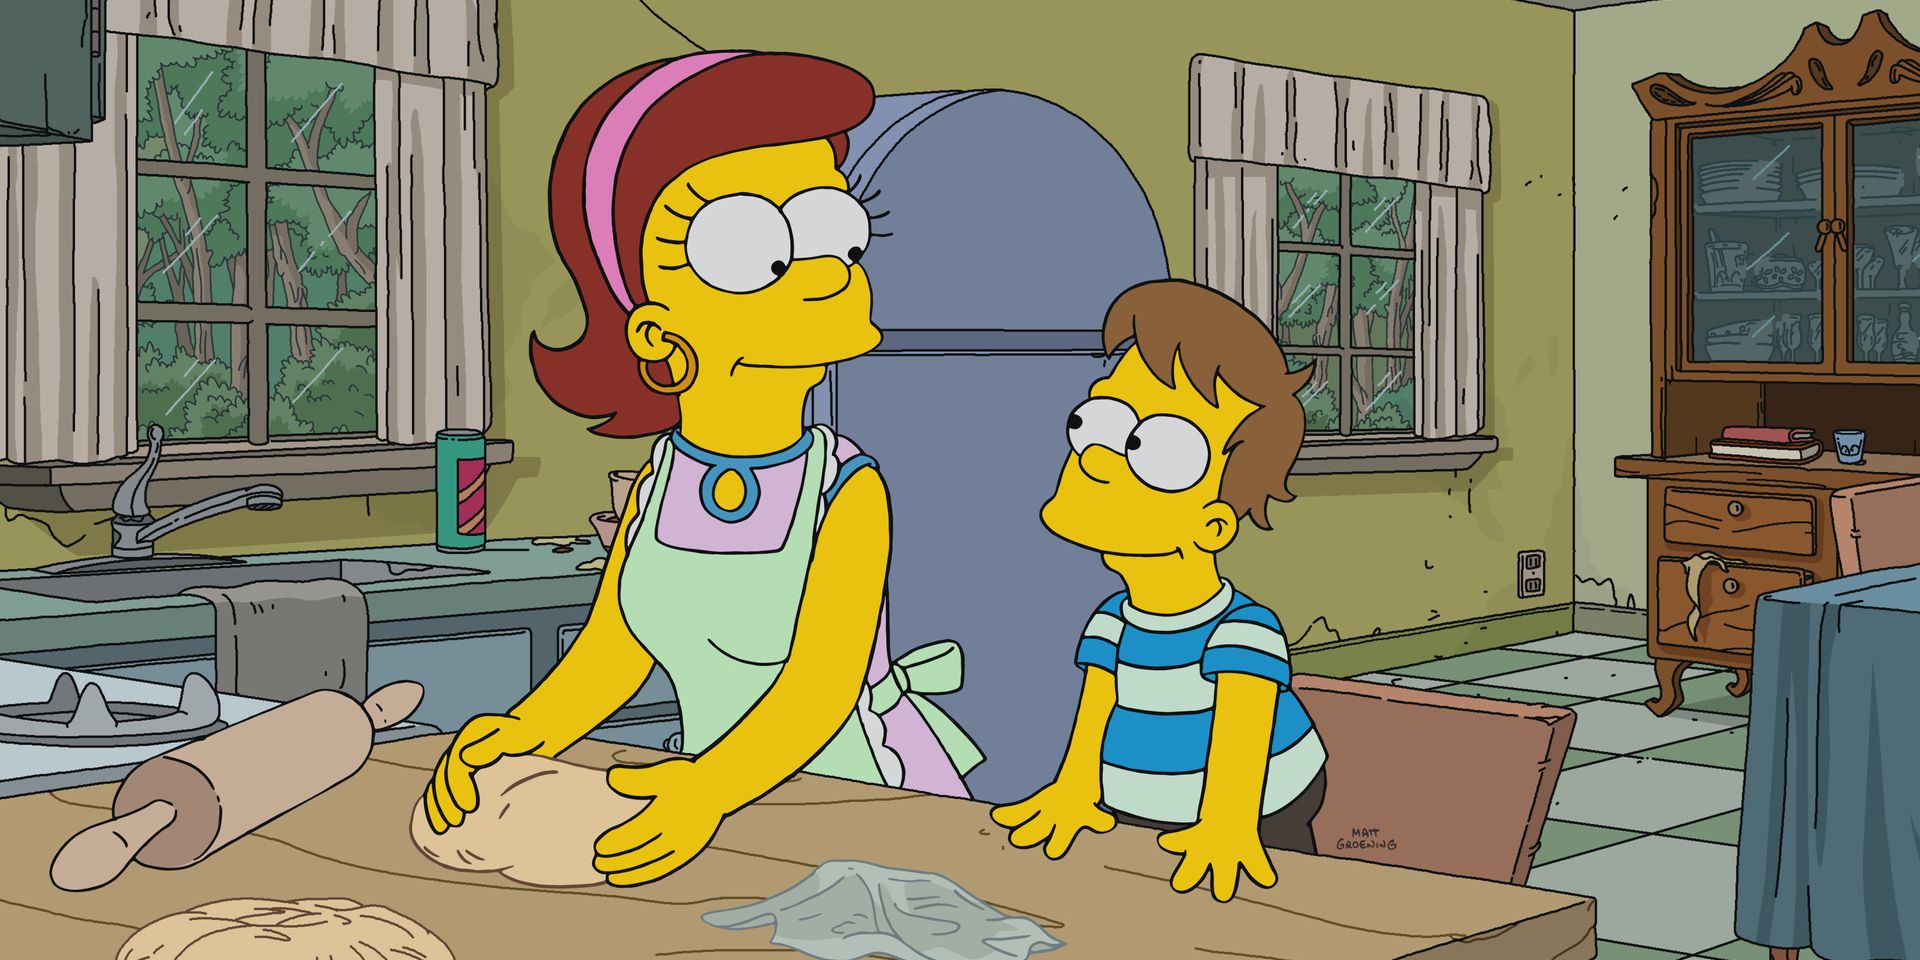 Mona making dough with a young Homer in The Simpsons